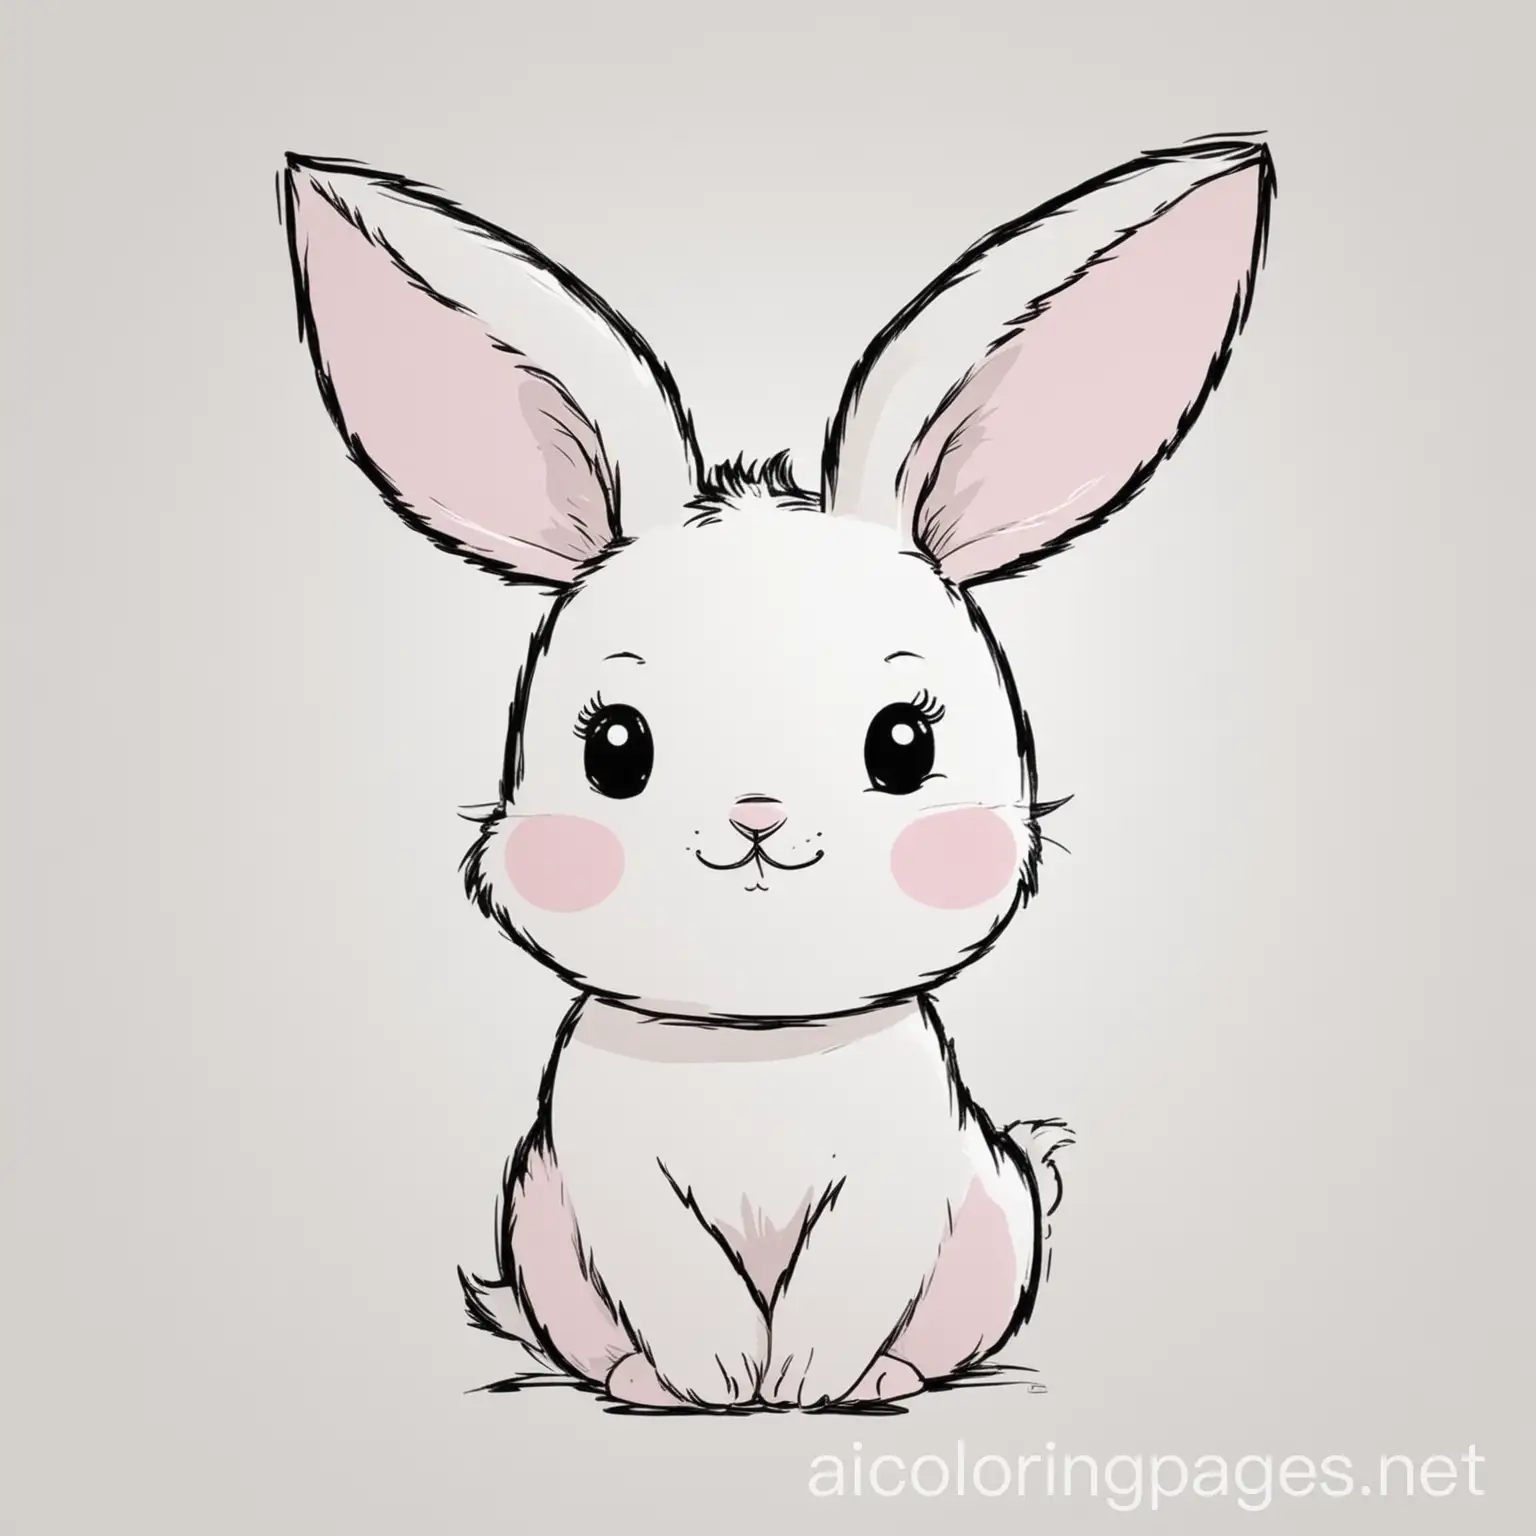 Pink bunny, Coloring Page, black and white, line art, white background, Simplicity, Ample White Space.